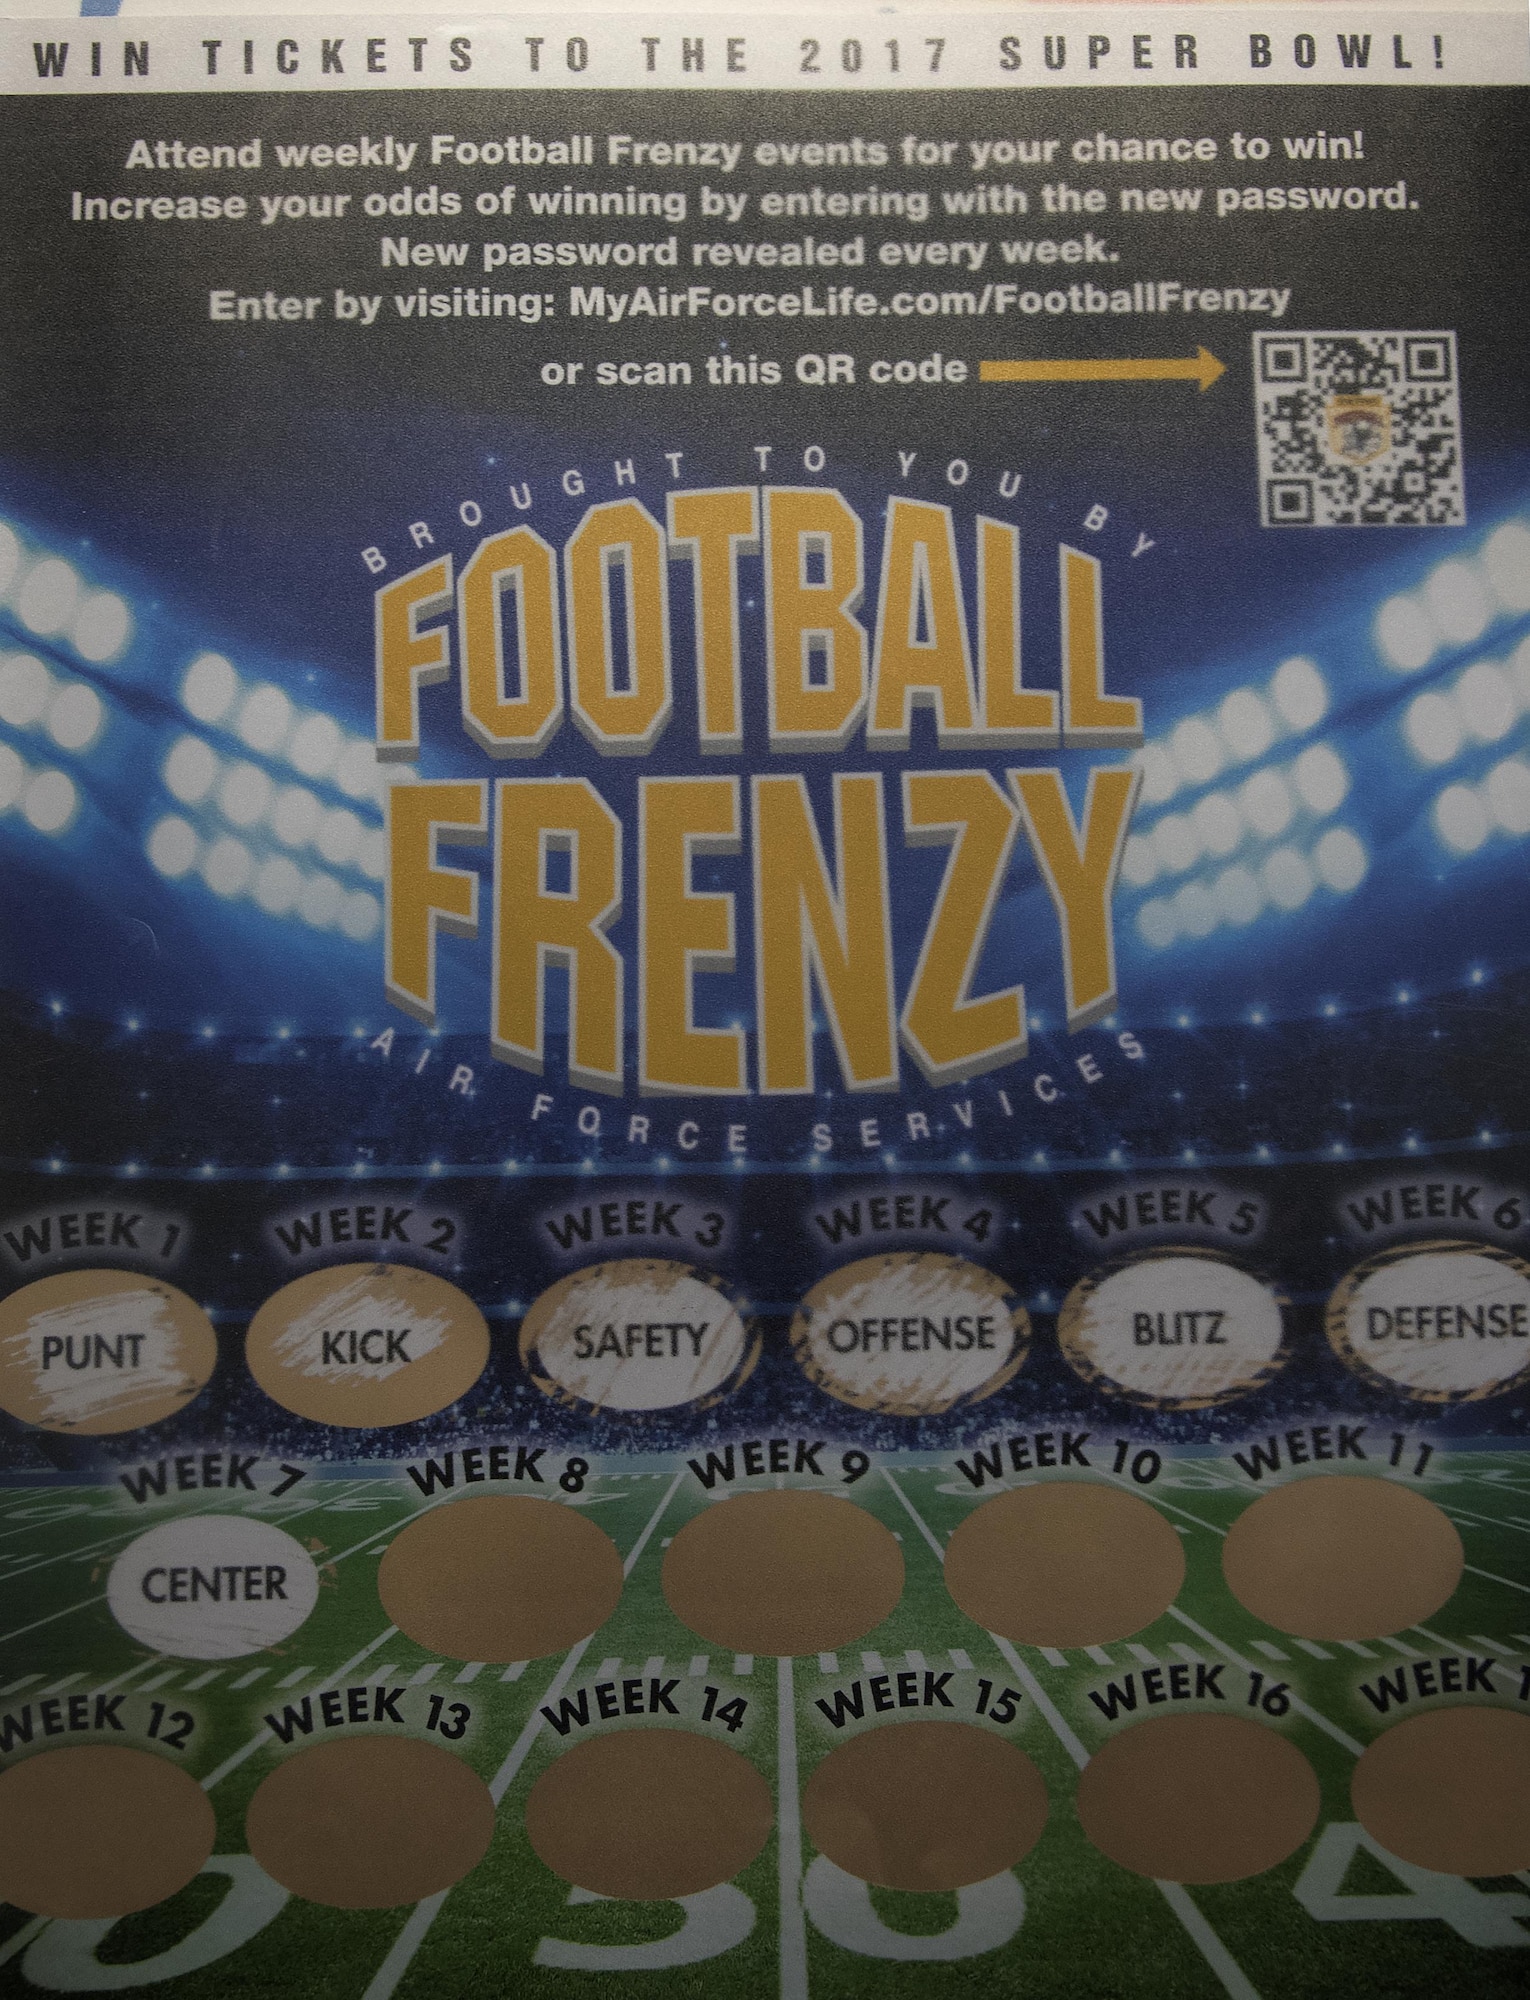 A Football Frenzy banner hangs inside the F.E. Warren Air Force Base, Wyo., bowling alley Oct. 26, 2016. The Warren Lanes bowling center hosts a Football Frenzy event every Sunday, where club members can get an exclusive code to enter for a chance to win prizes. (U.S. Air Force photo by Senior Airman Brandon Valle)